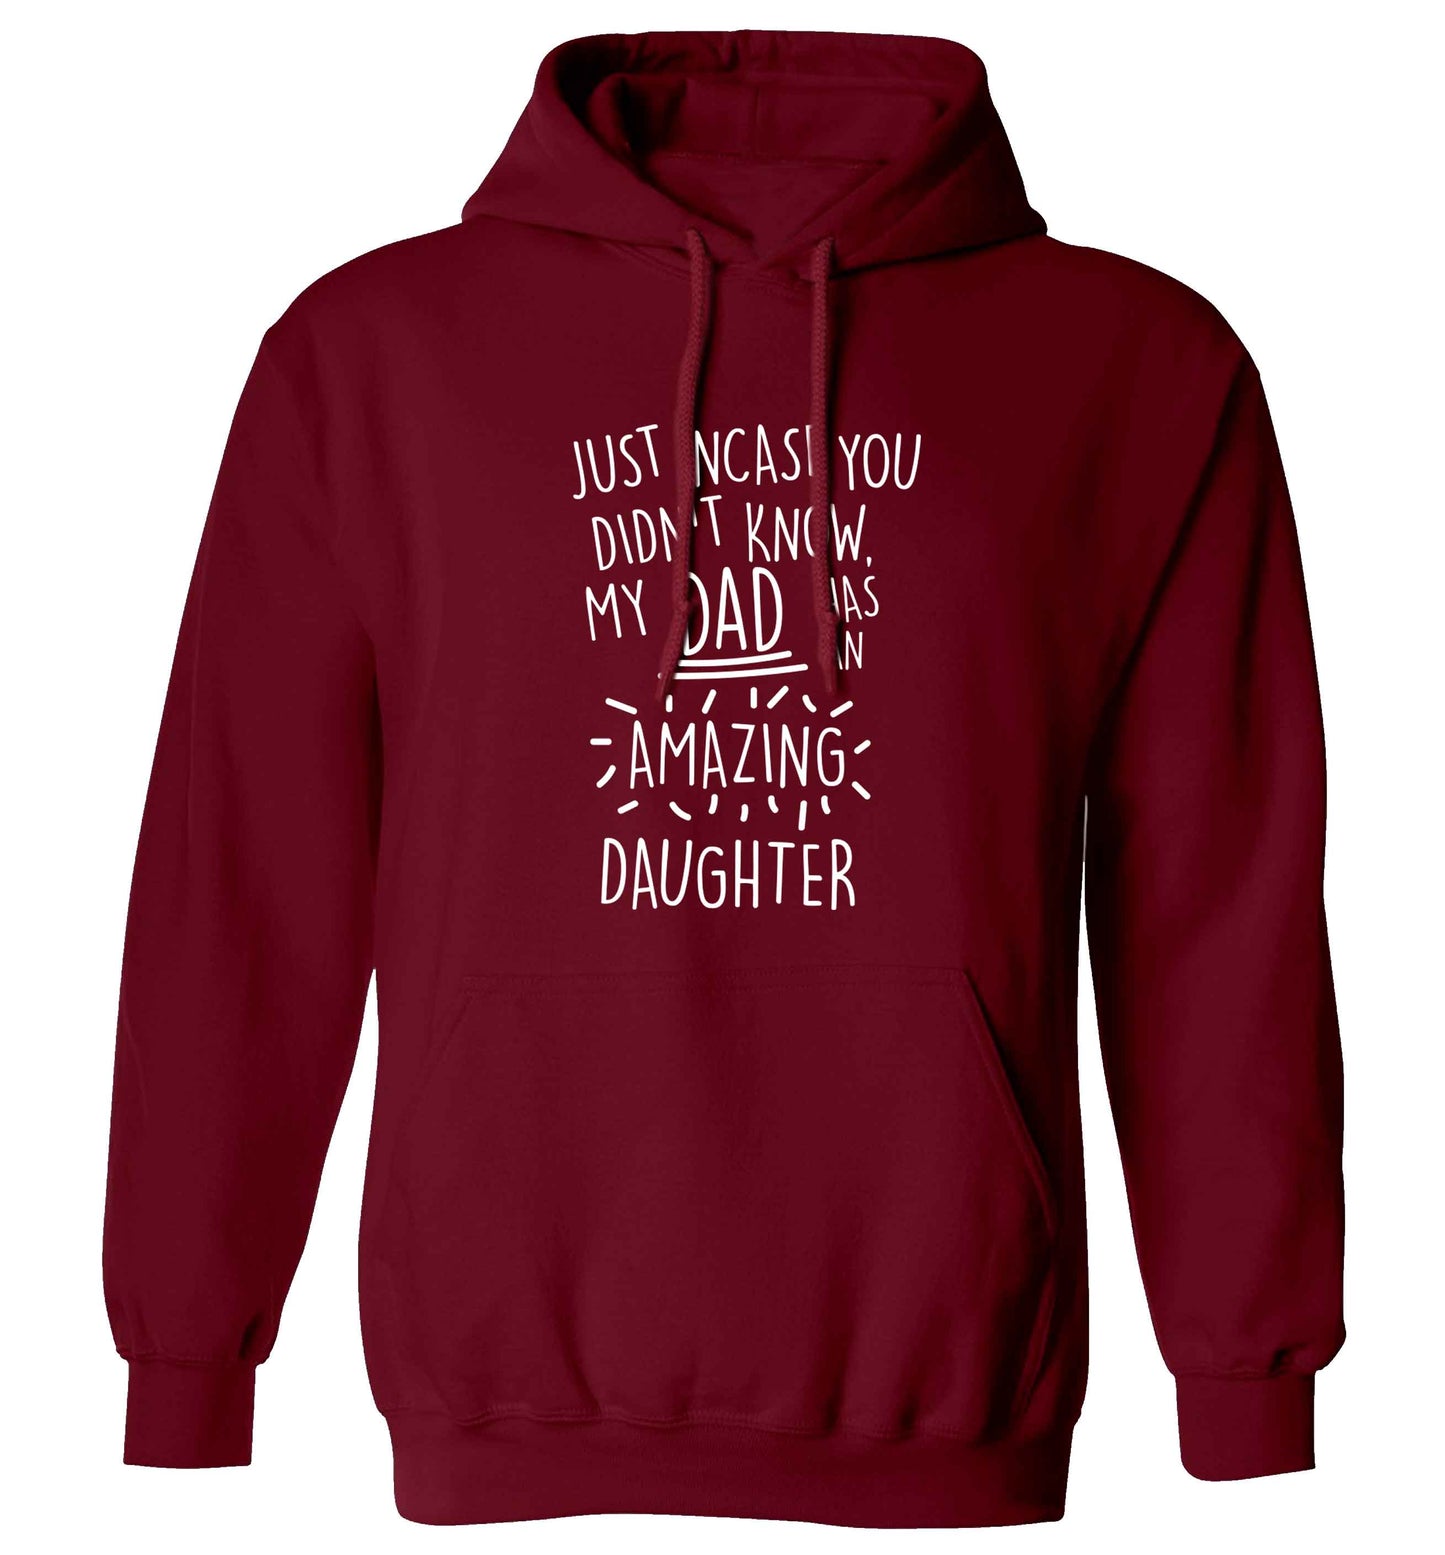 Just incase you didn't know my dad has an amazing daughter adults unisex maroon hoodie 2XL